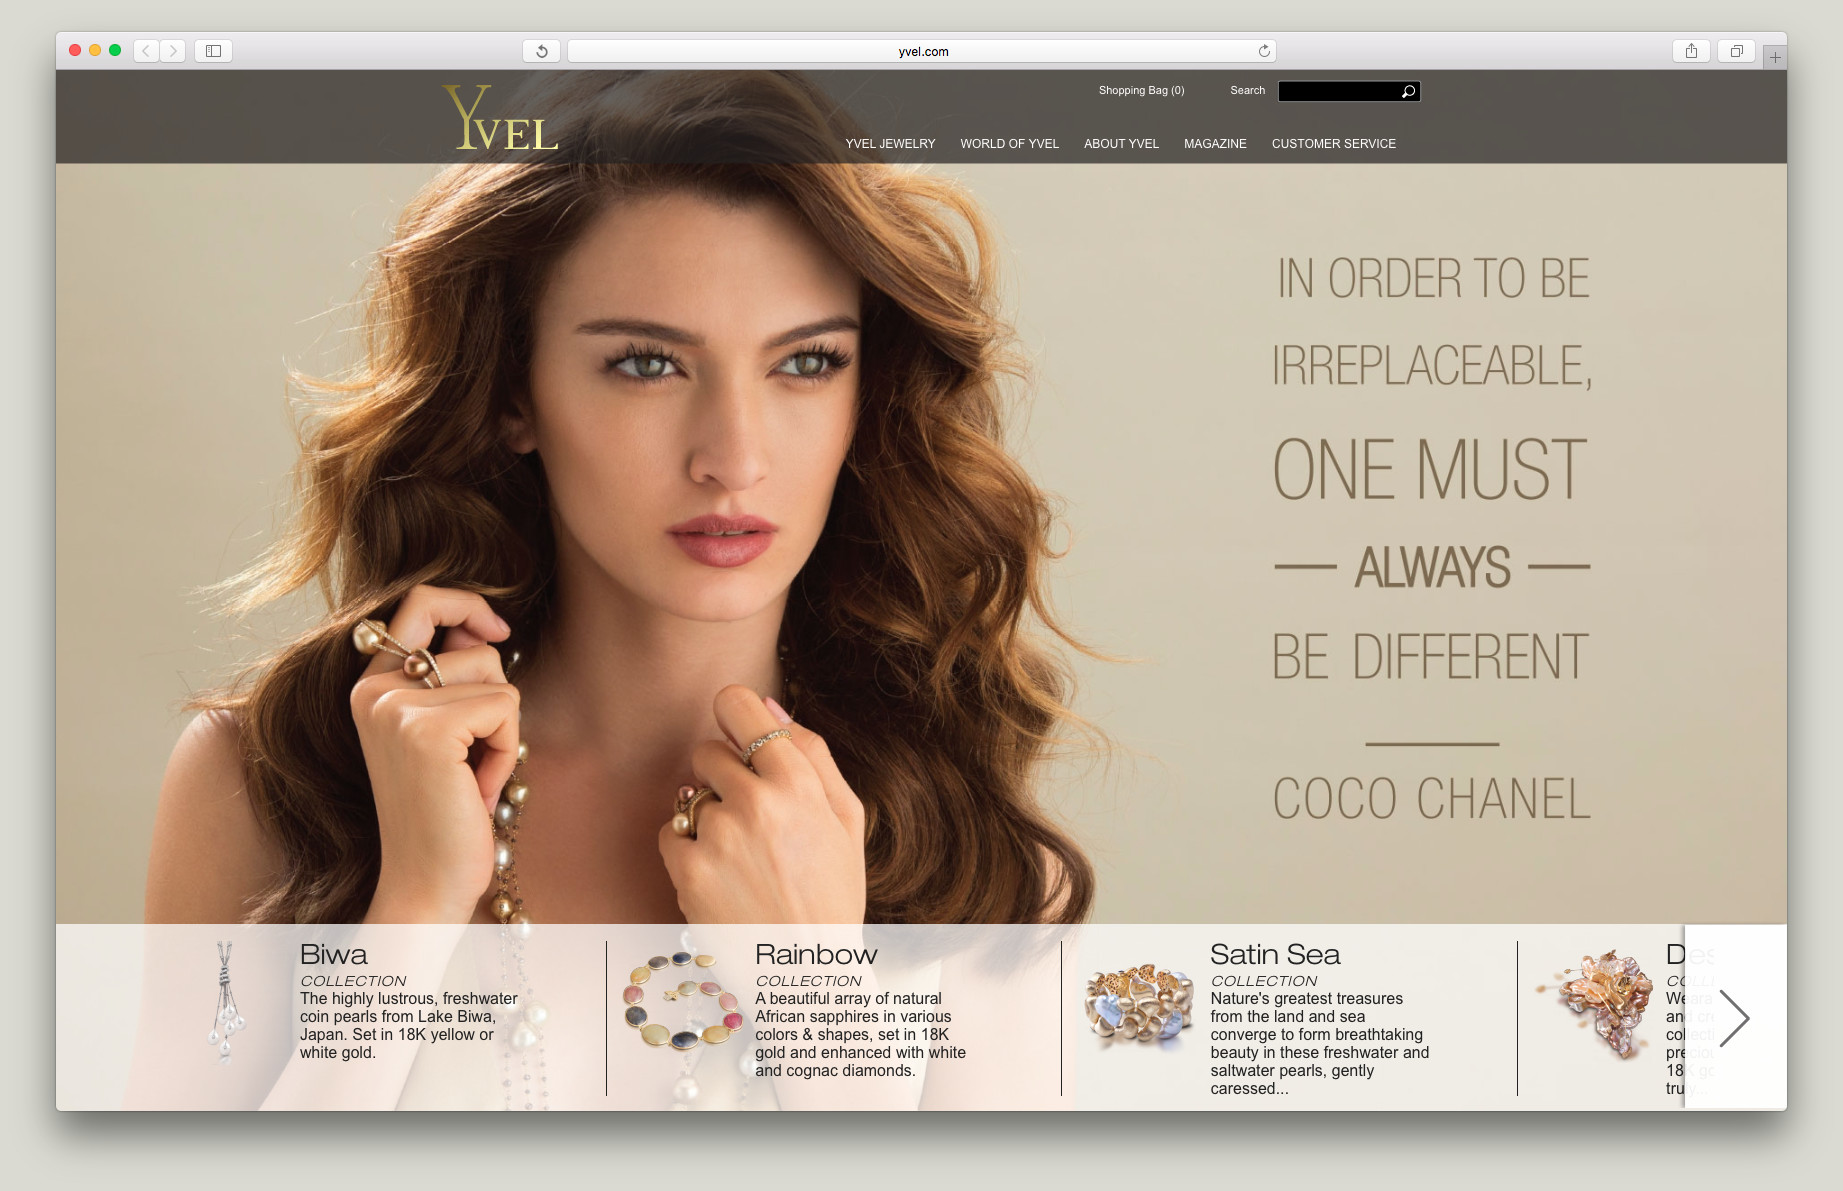 Yvel – The official website of Yvel jewelry